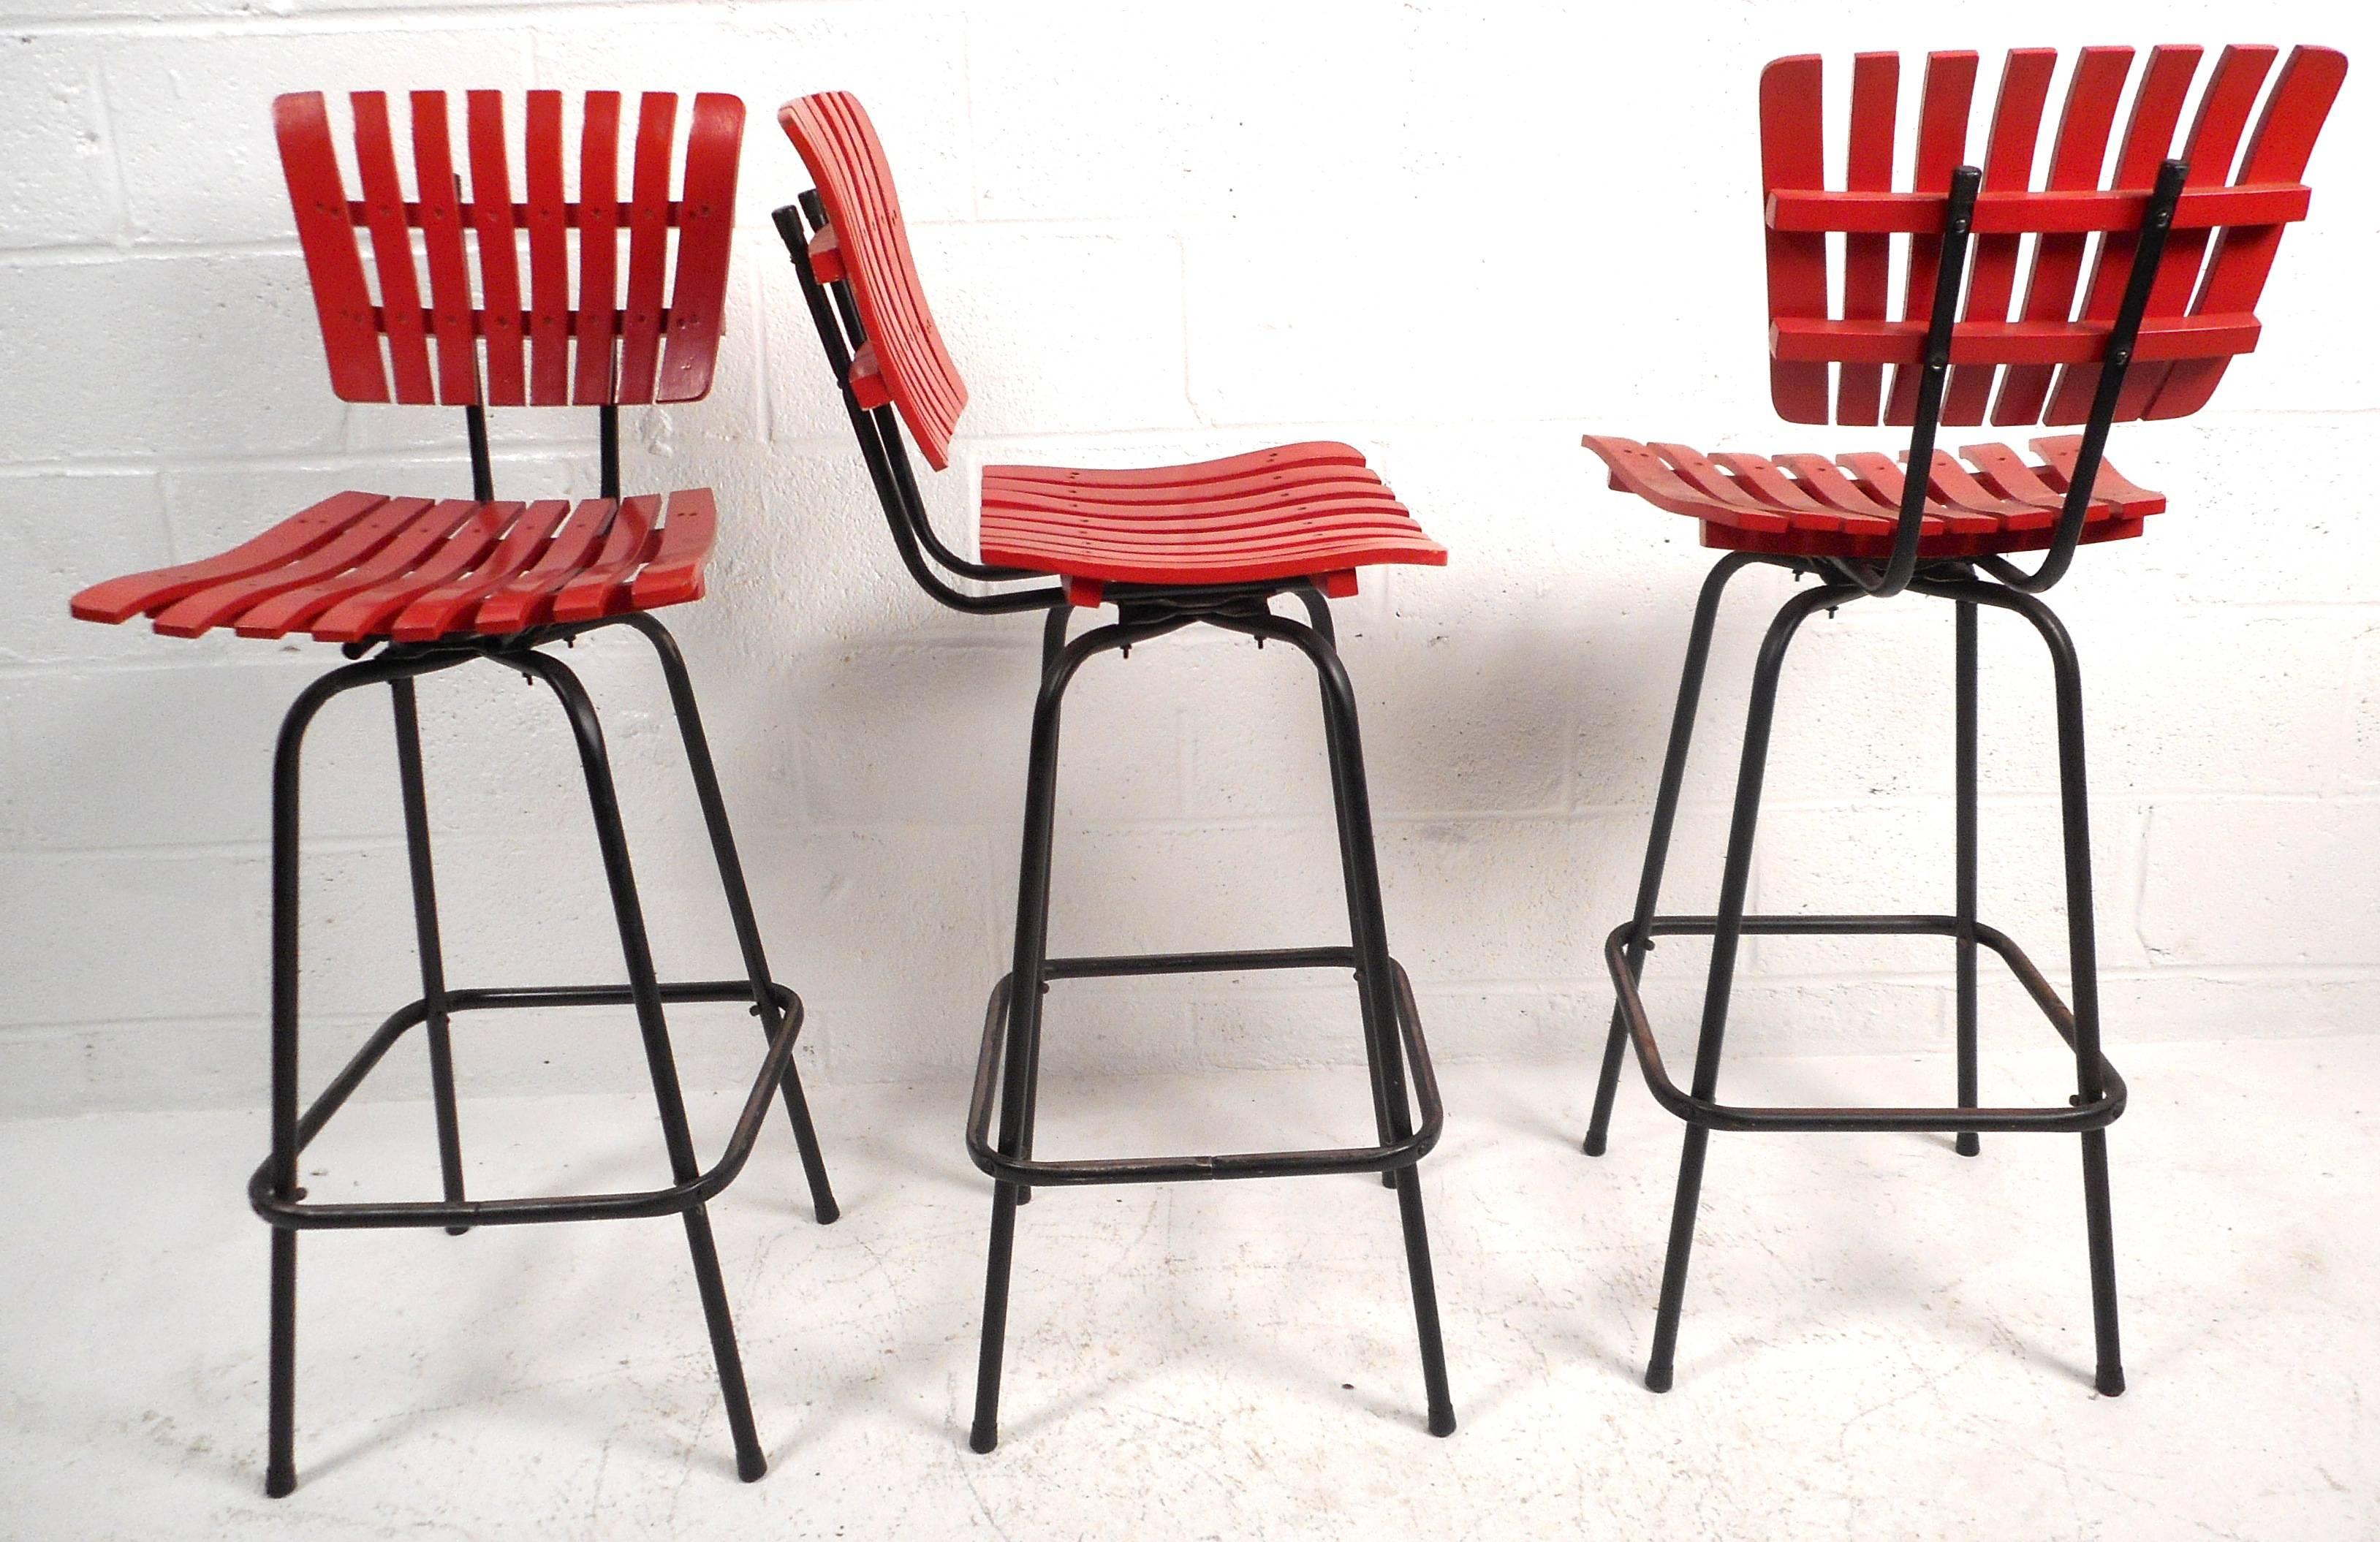 Lovely set of five vintage modern bar stools feature bright red slatted wood seats and backs, tubular iron bases, and a smooth swivel. The stylish design of Arthur Umanoff provides a unique look as well as comfort in any setting. Please confirm item